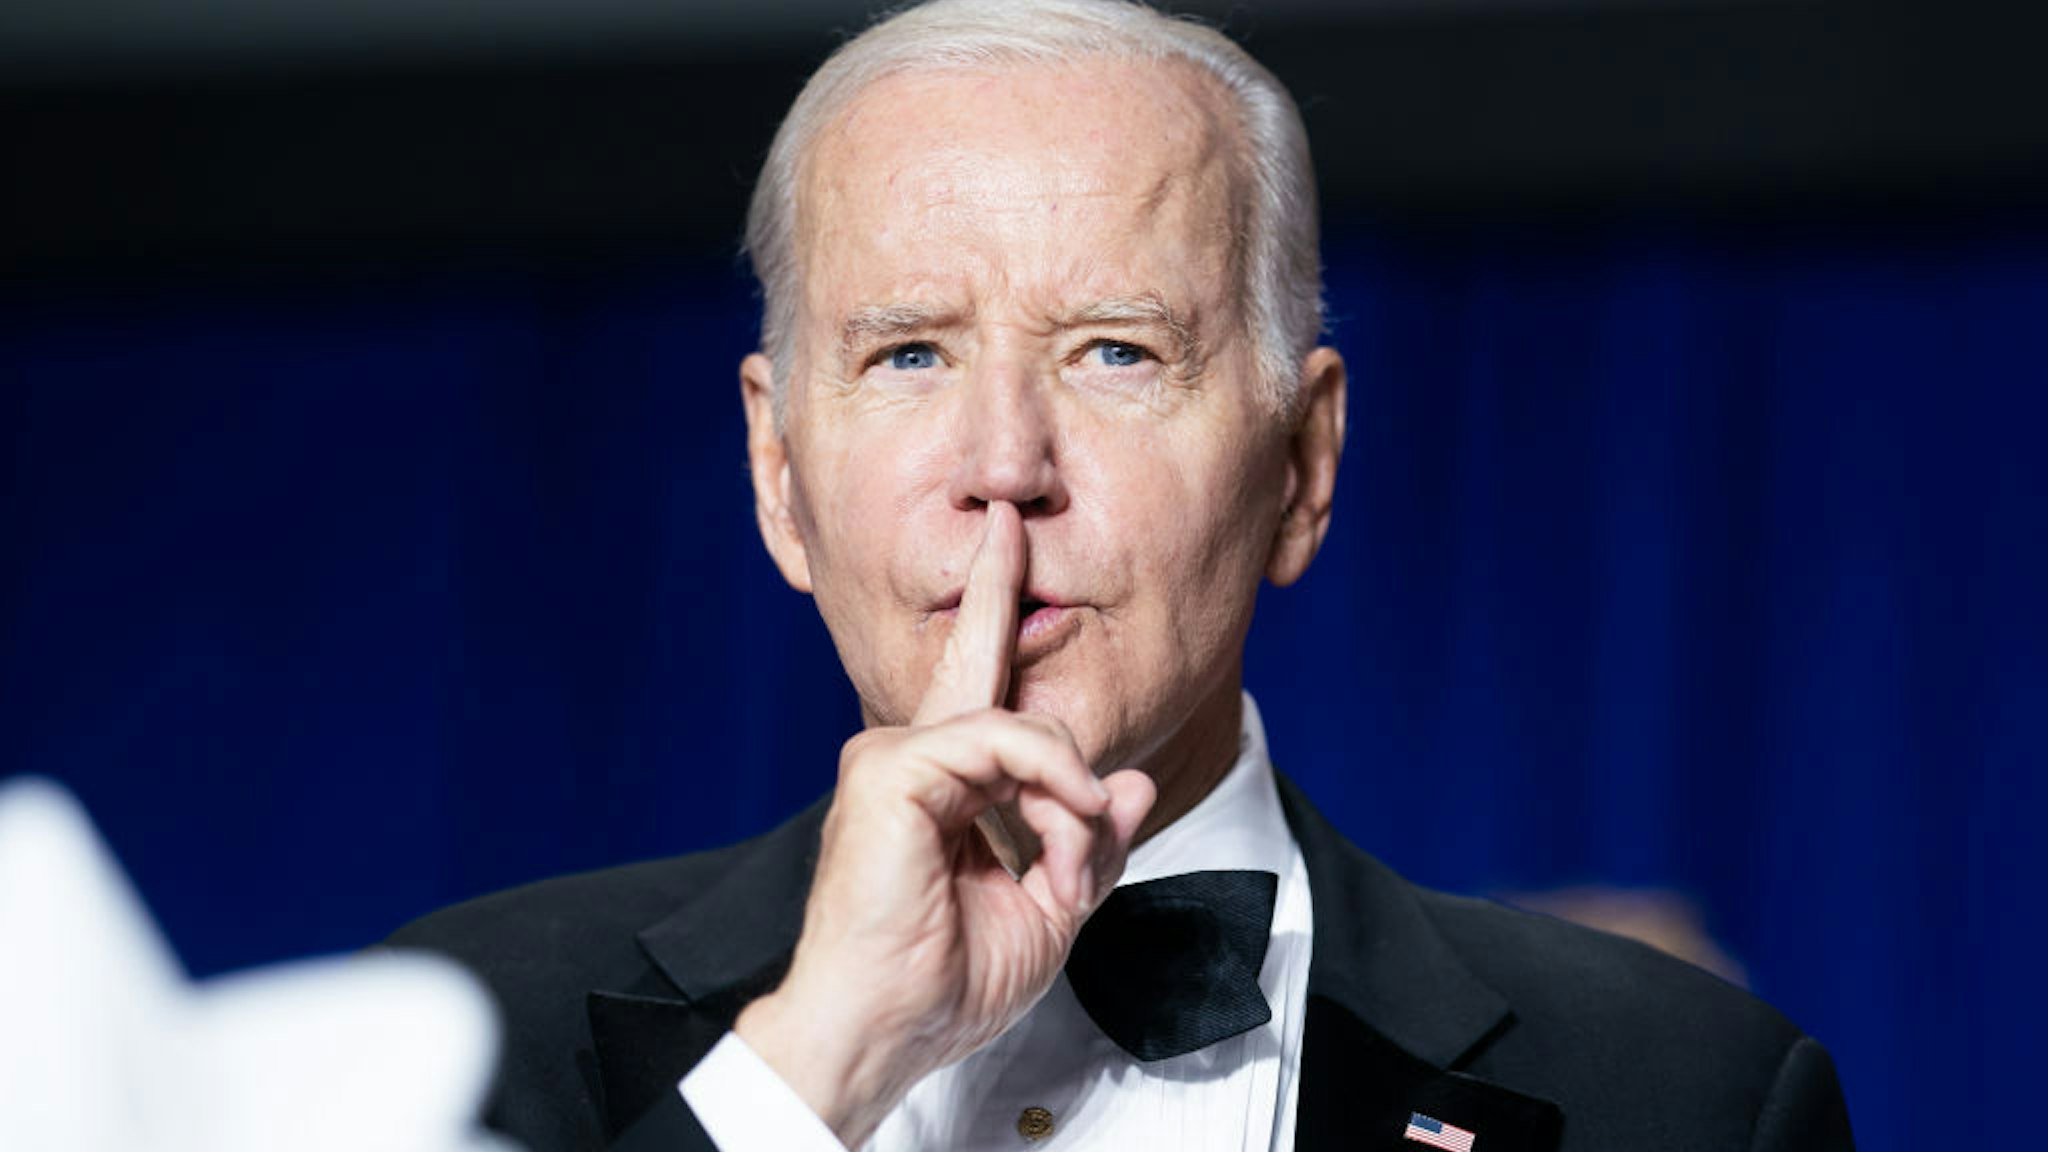 US President Joe Biden quiets the crowd during the White House Correspondents' Association (WHCA) dinner in Washington, DC, US, on Saturday, April 29, 2023. The annual dinner raises money for WHCA scholarships and honors the recipients of the organization's journalism awards. Photographer: